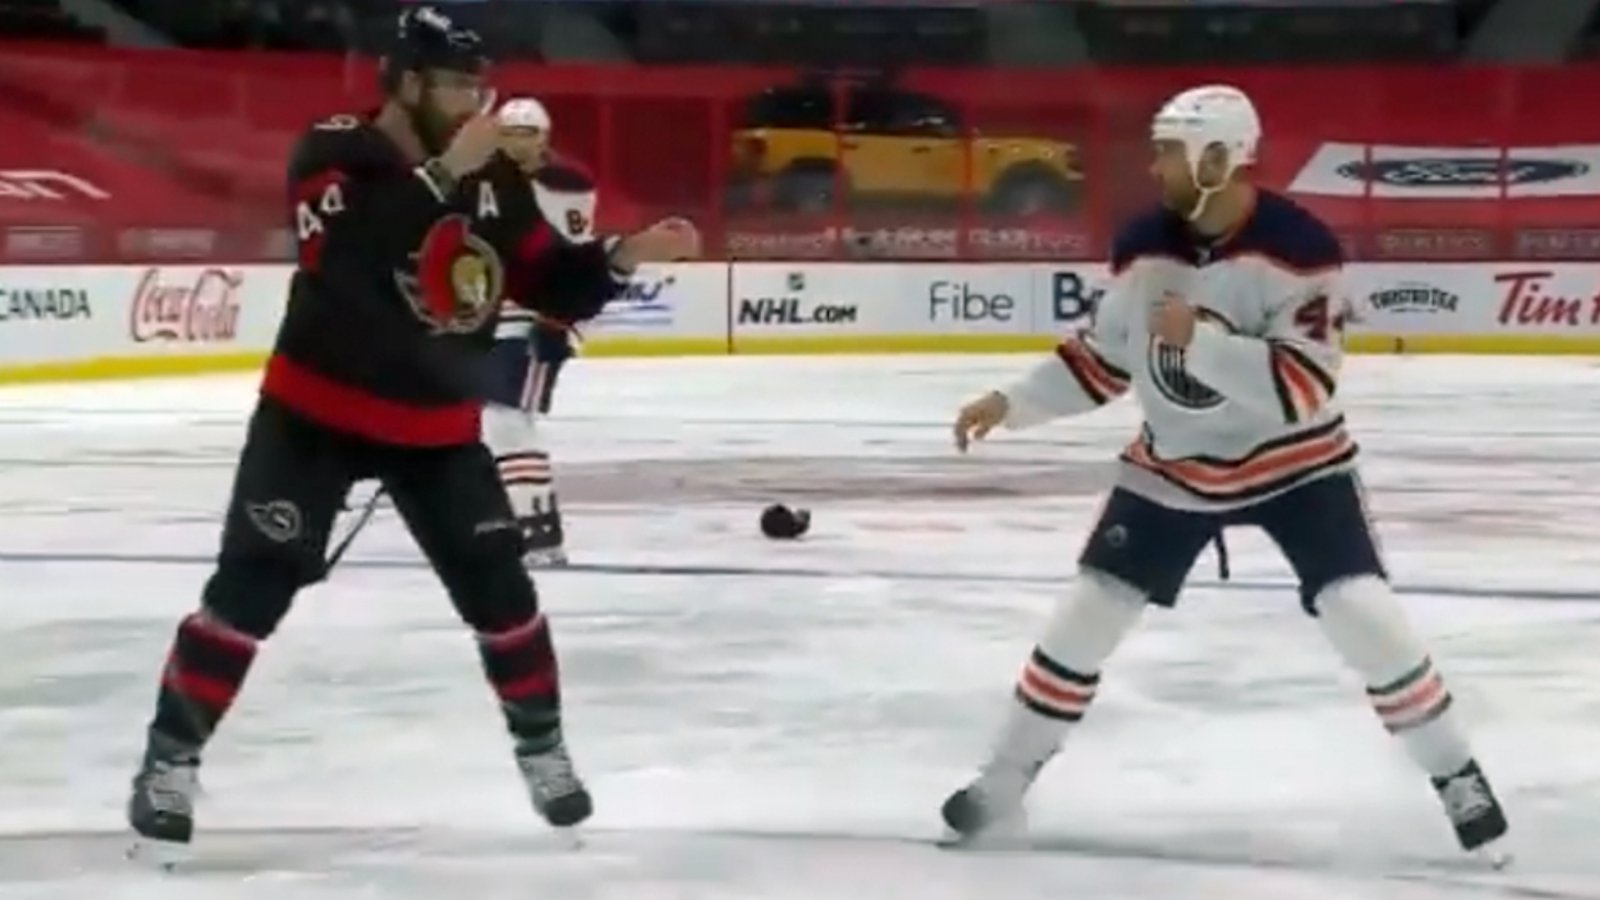 Kassian and Gudbranson drop the gloves, throw only haymakers